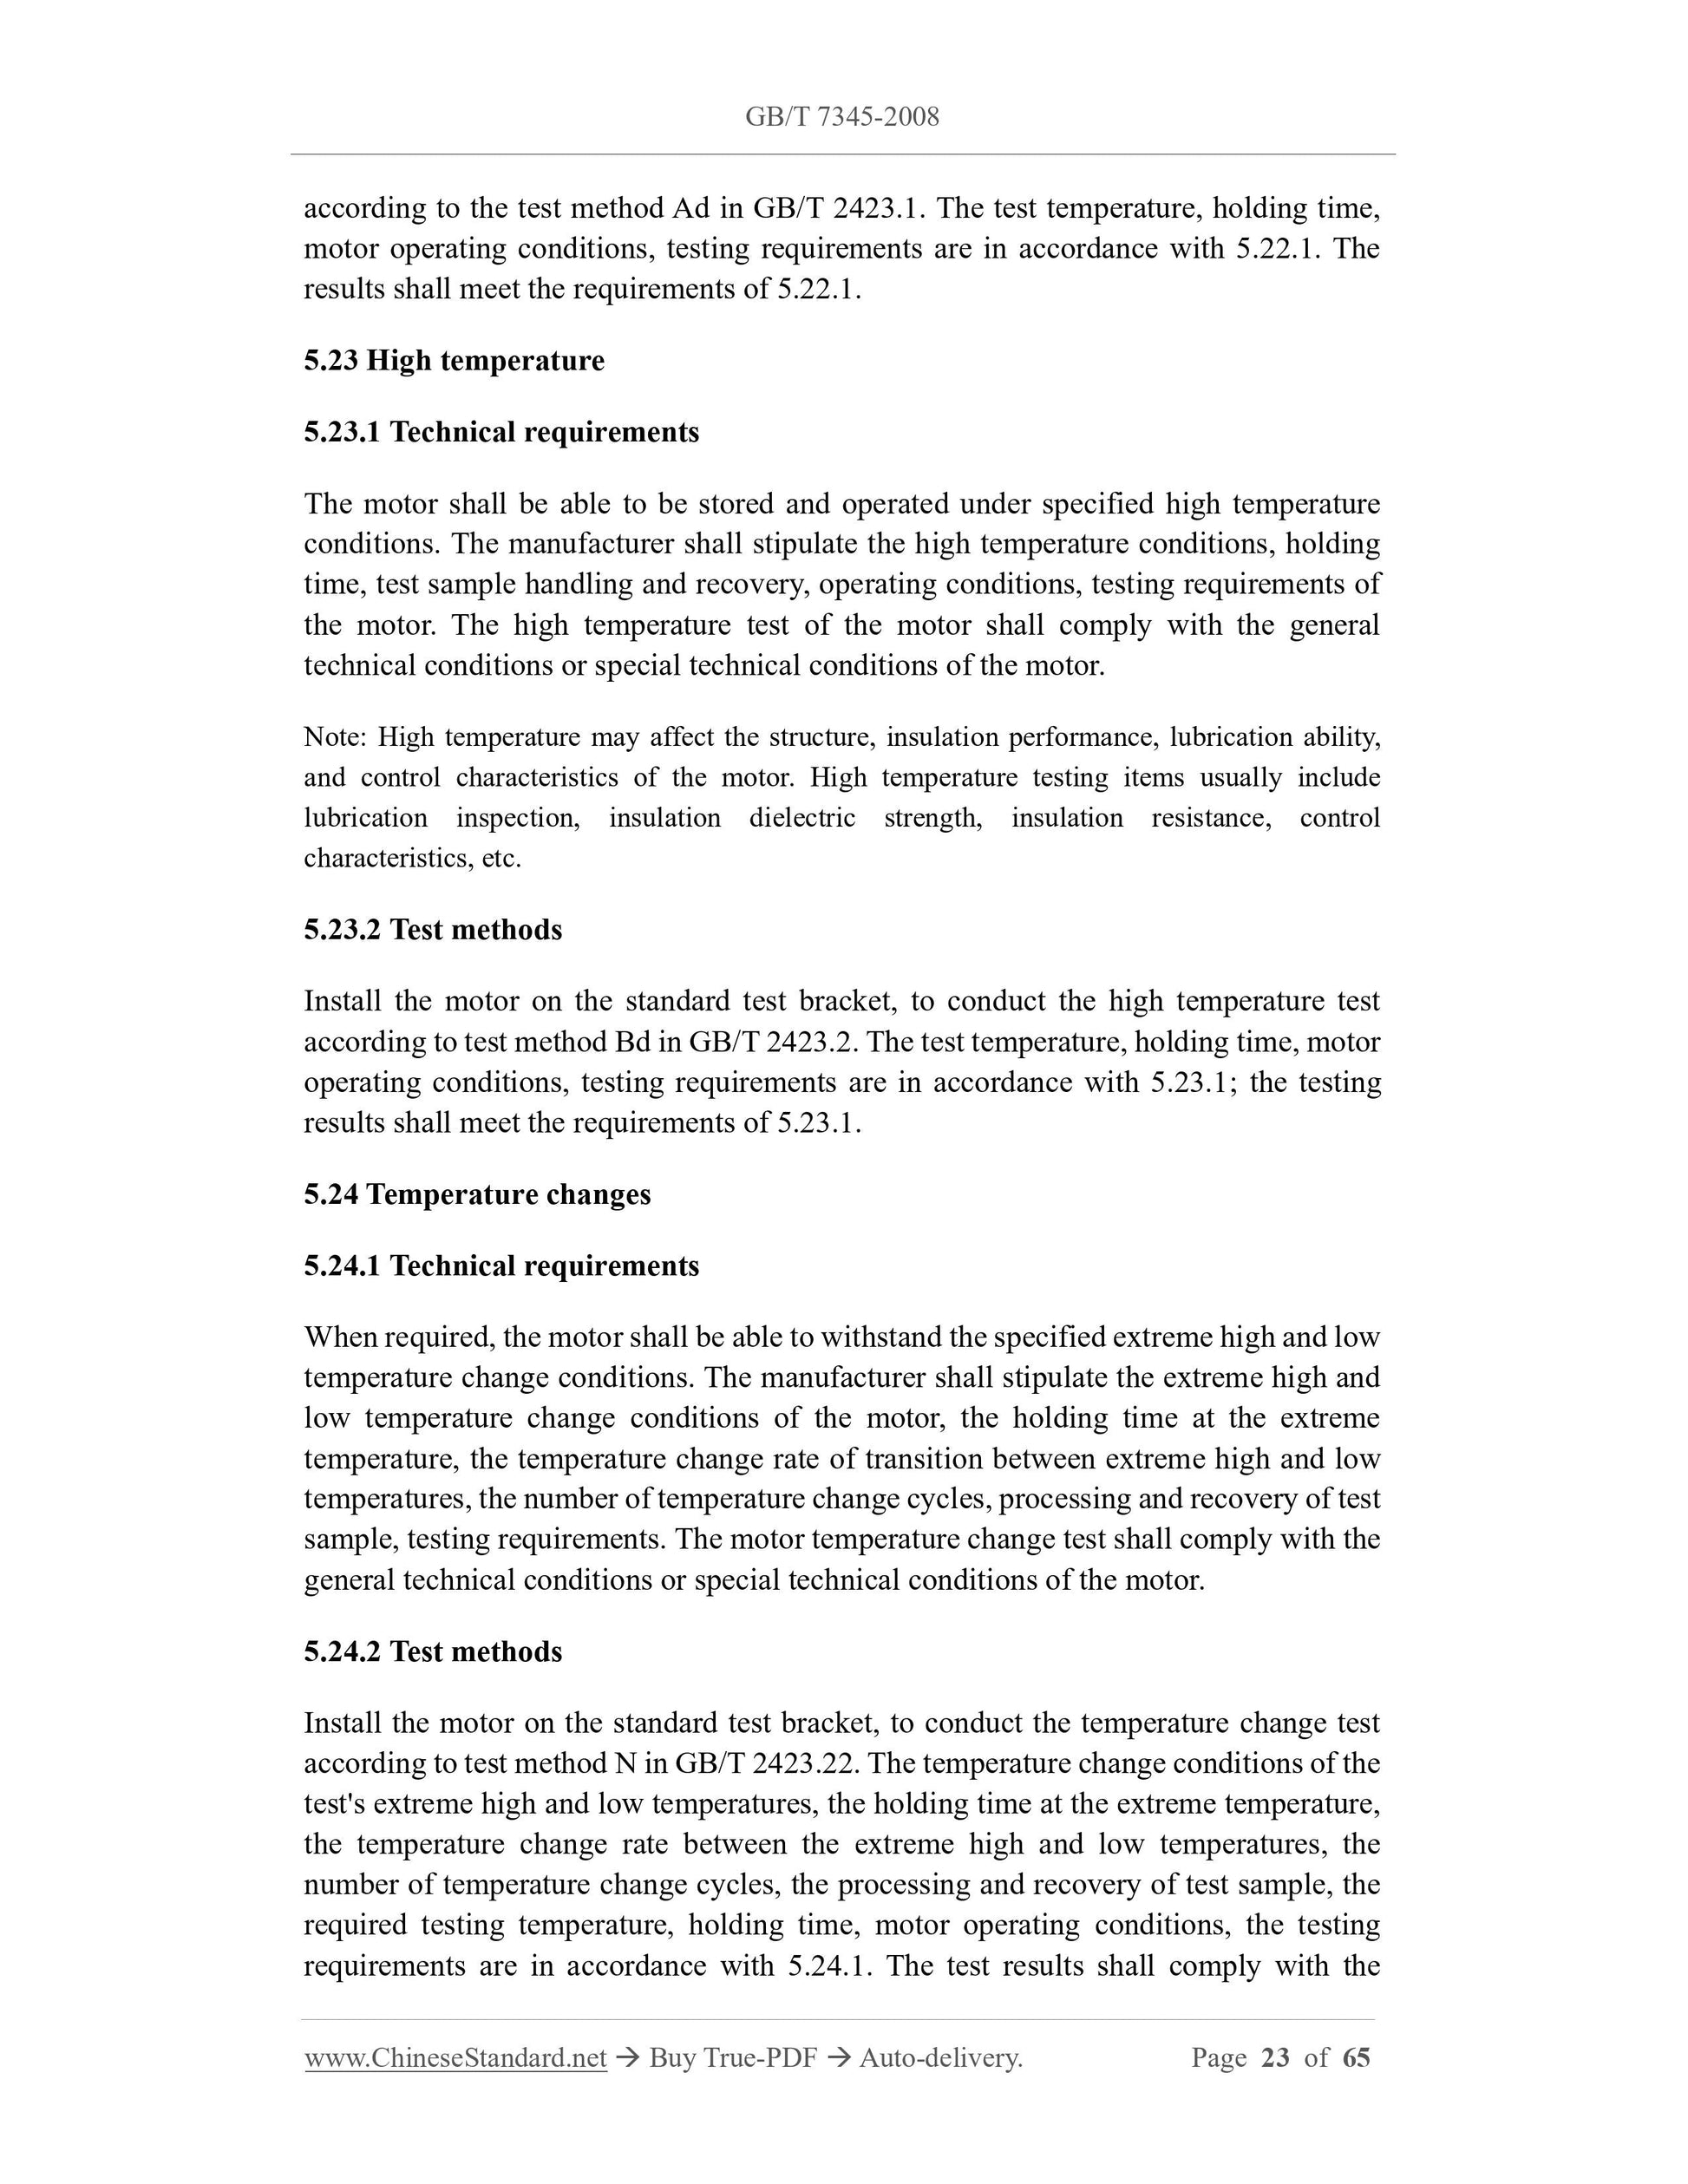 GB/T 7345-2008 Page 11